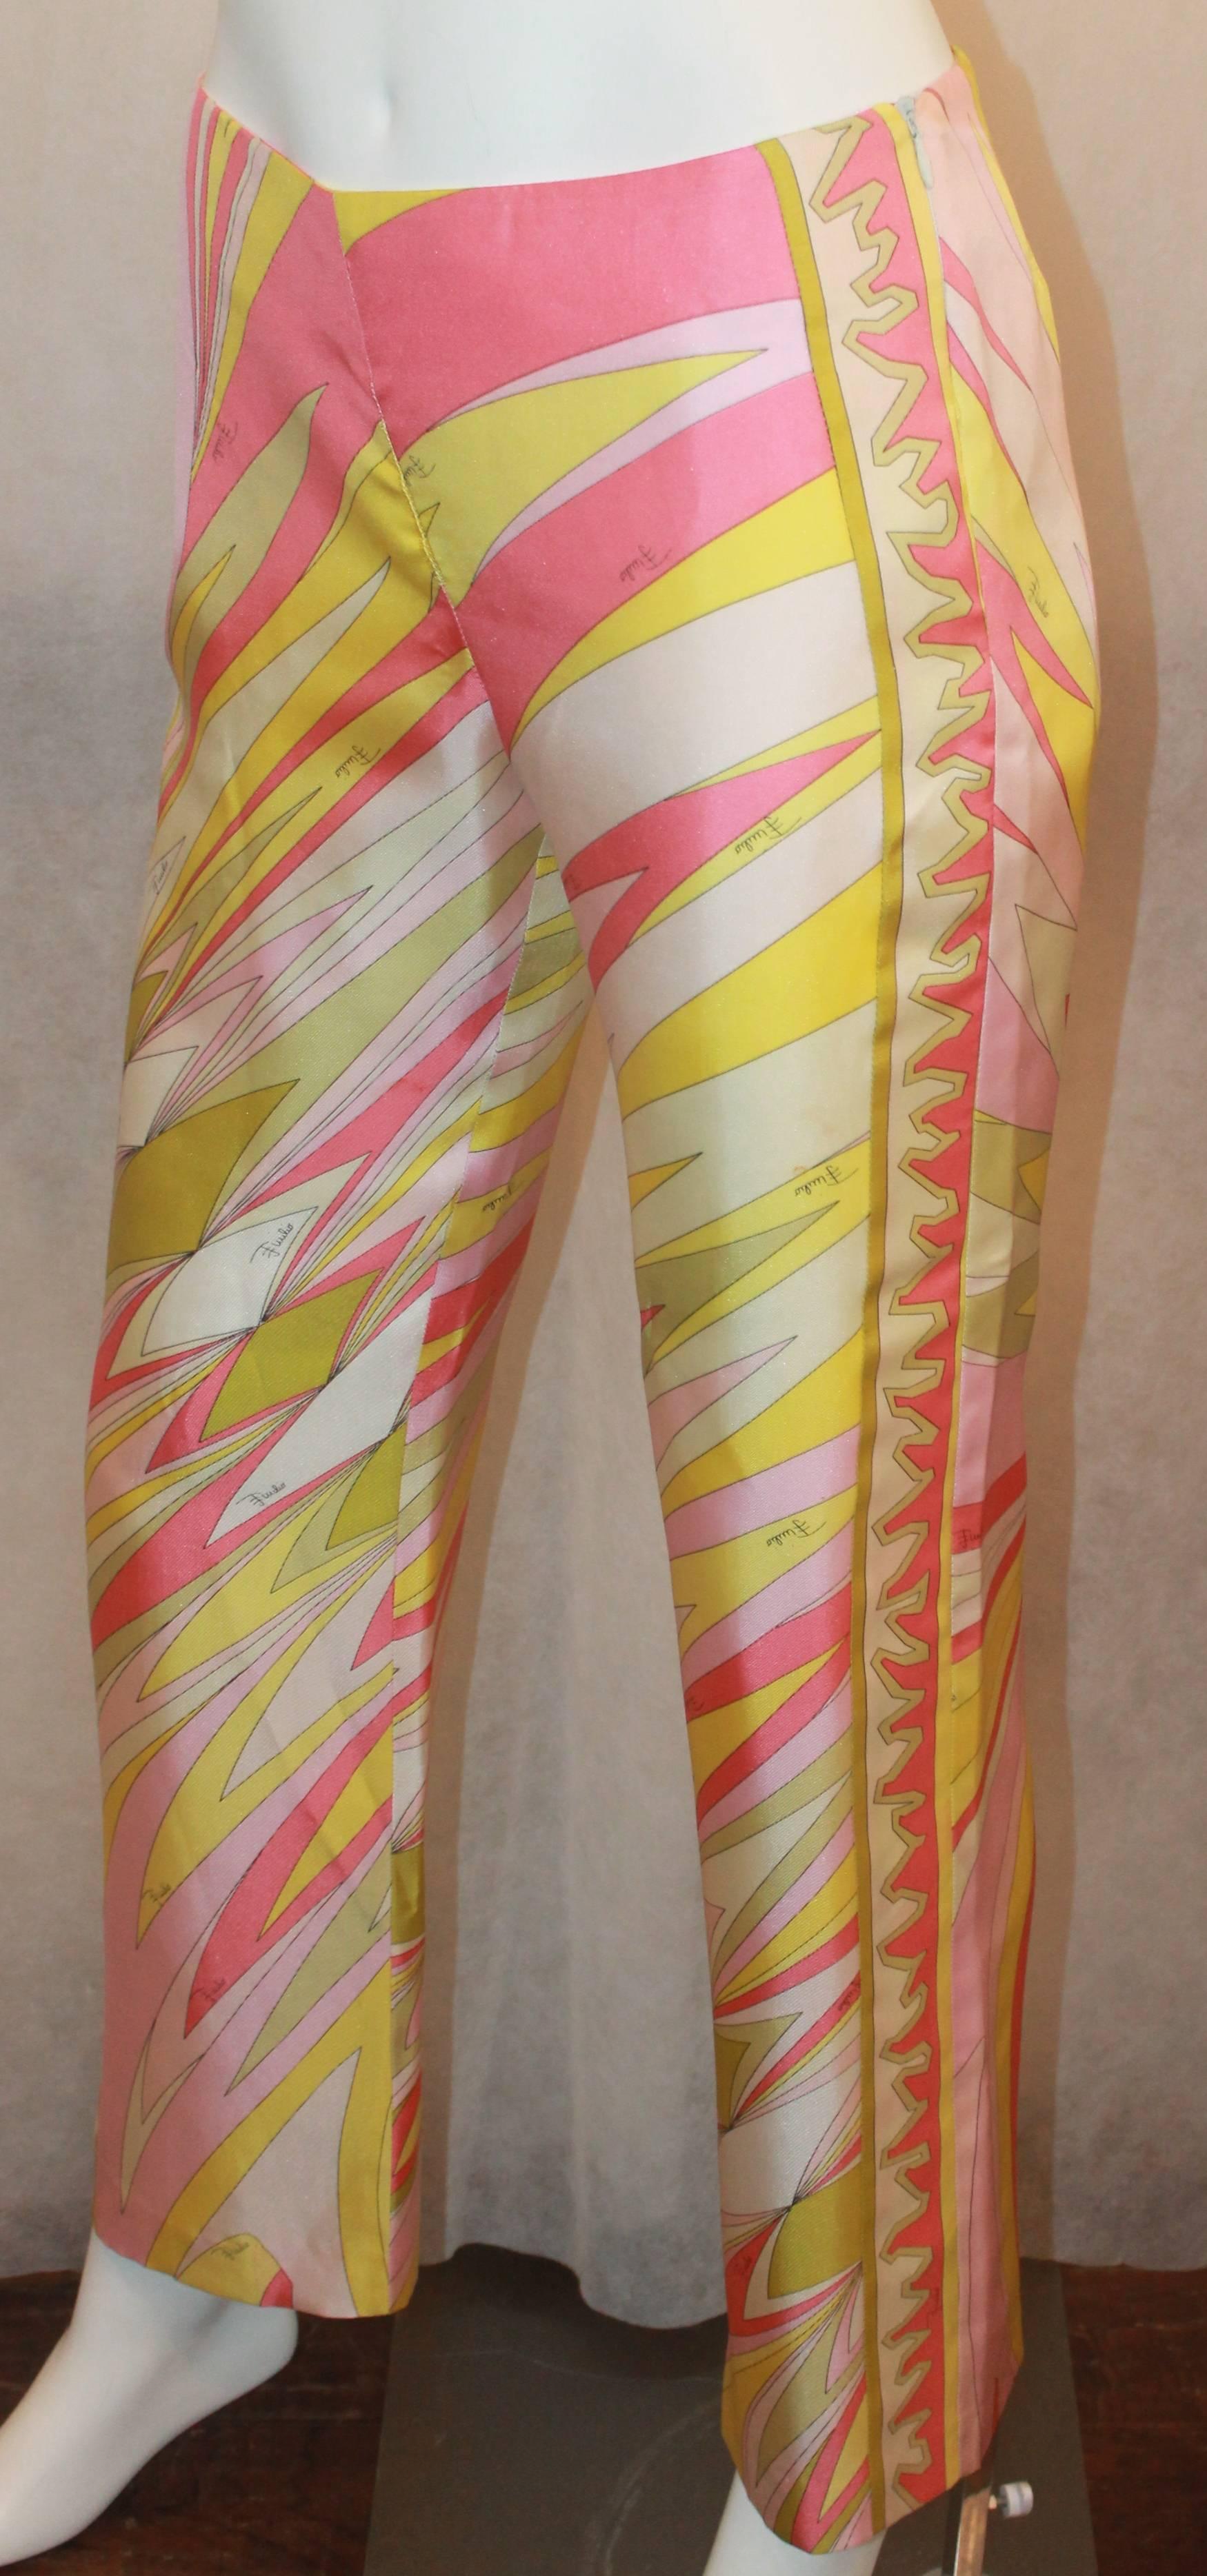 Emilio Pucci Pink, White, & Yellow Print Silk Palazzo Pants - 4.  These pants are in good condition with only a minor stain on the left leg and slight pulling along the front center seam.  They feature a lovely pink, yellow, and white print silk